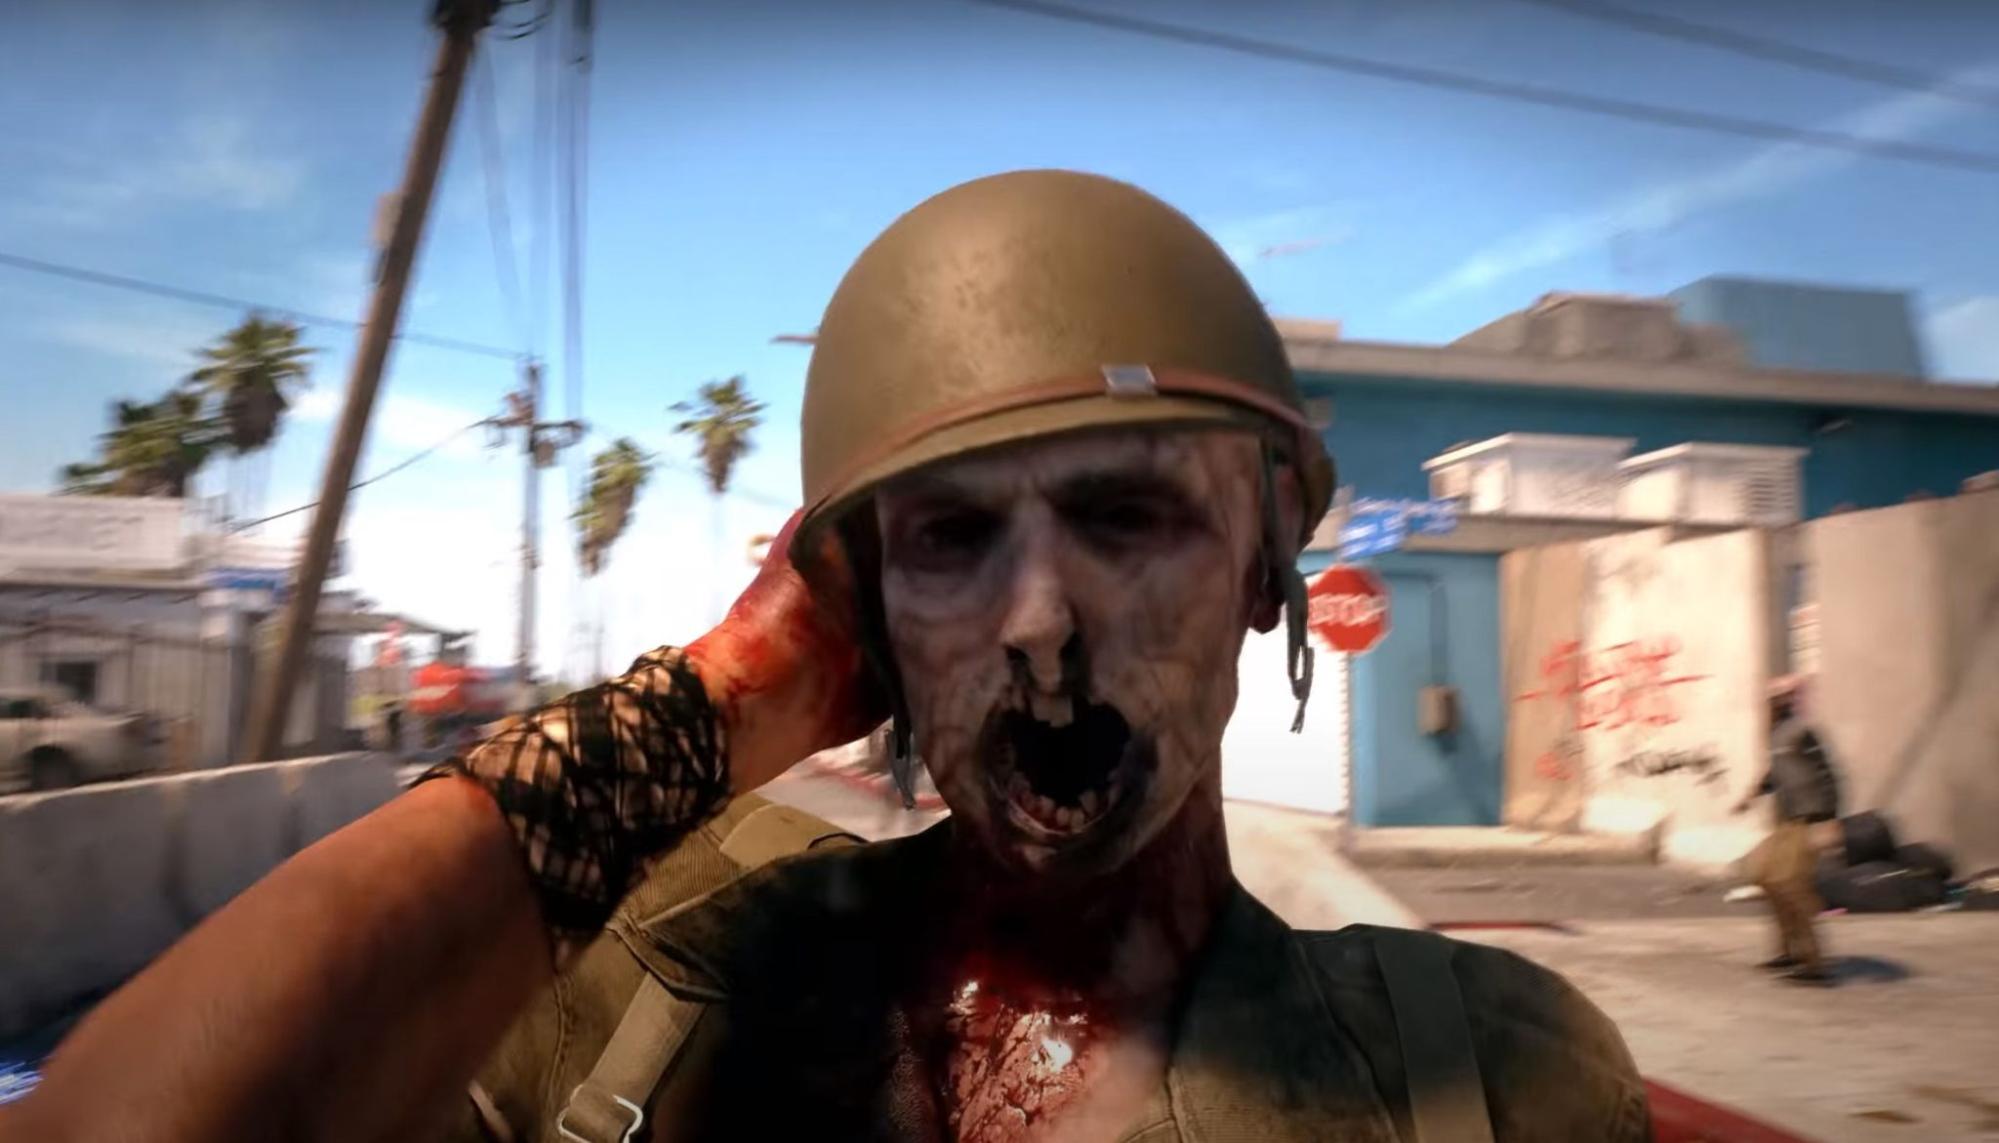 What Platforms Will Dead Island 2 Release On?